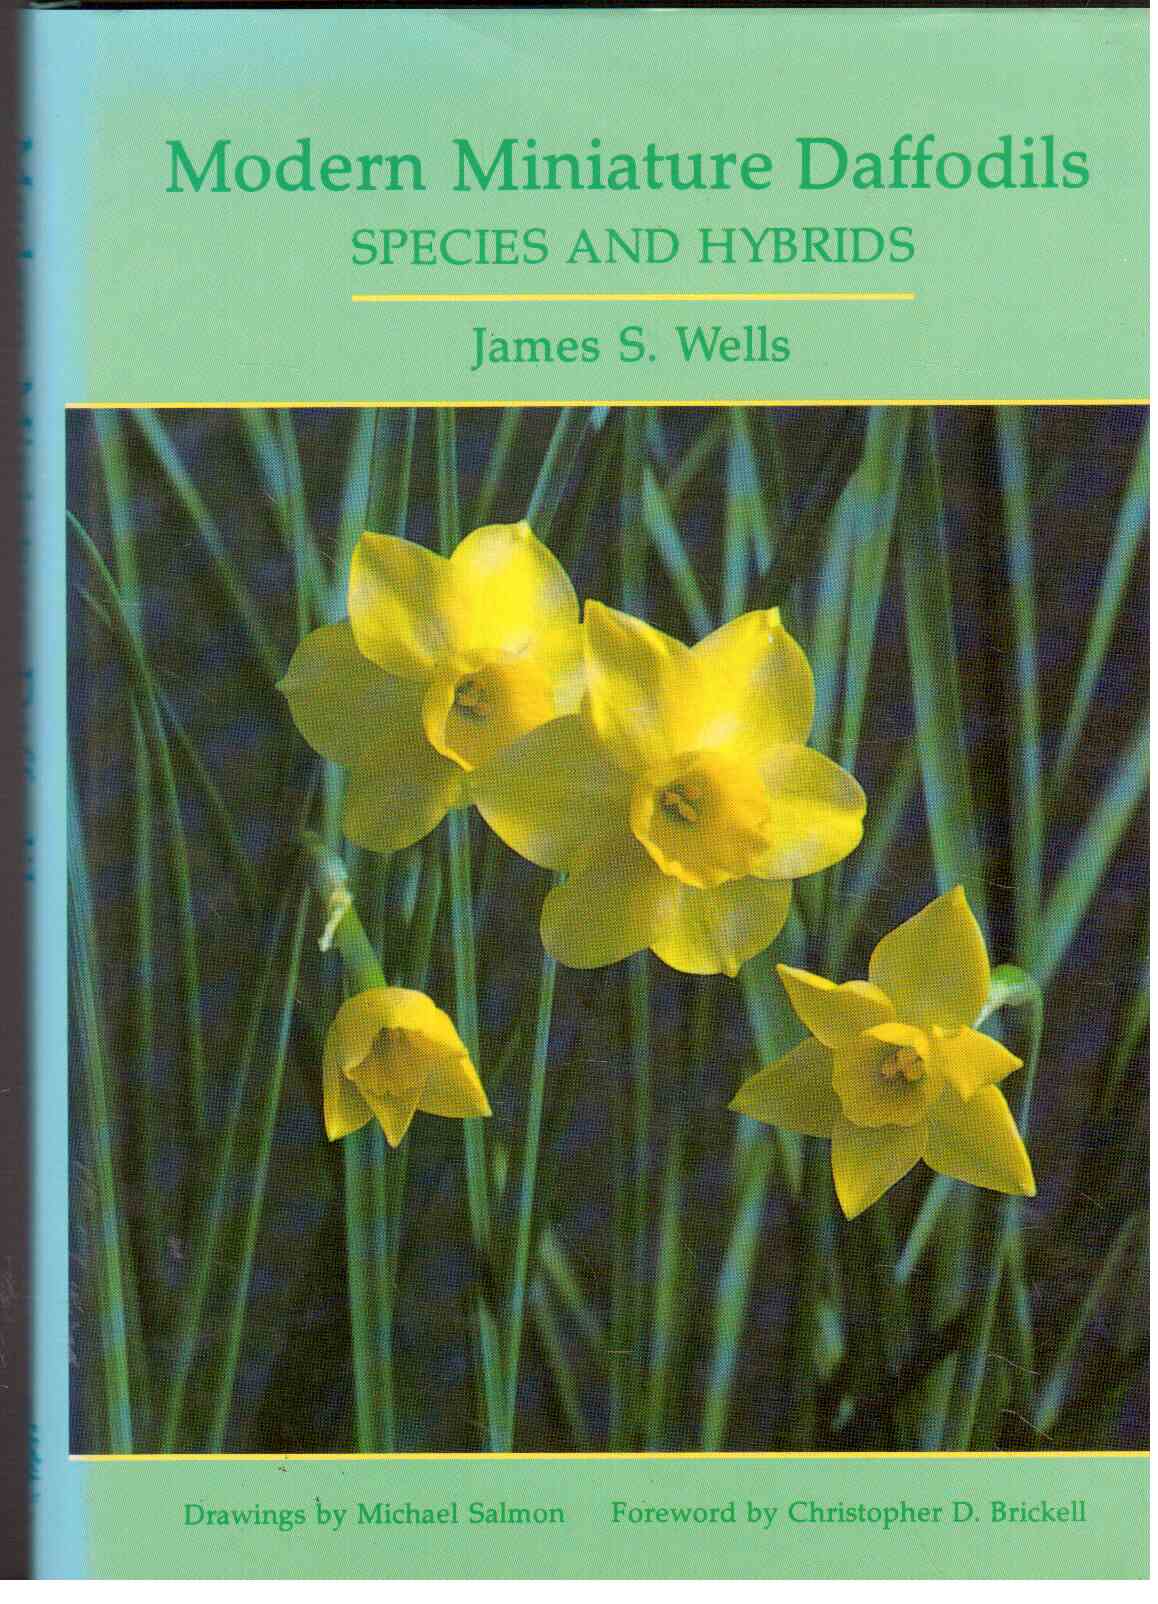 Modern Miniature Daffodils : Species and Hybrids